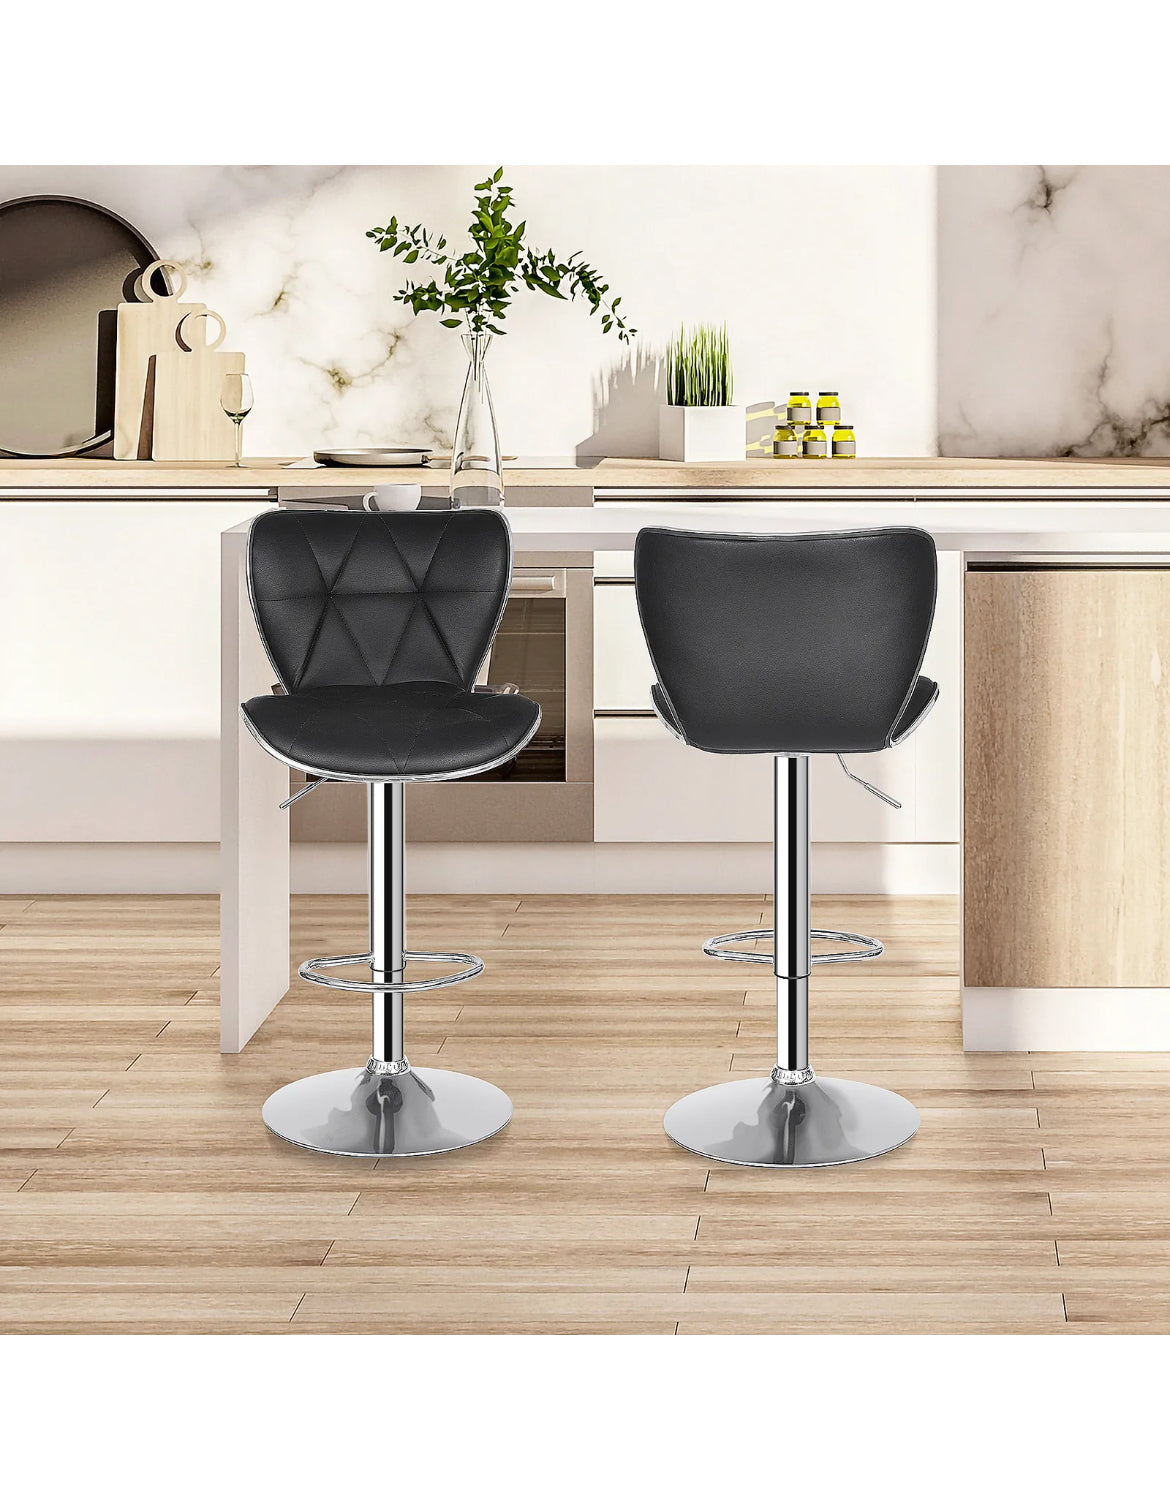 Swivel Barstools adjustable height with back support - Kitchen Counter Stool Set of 2